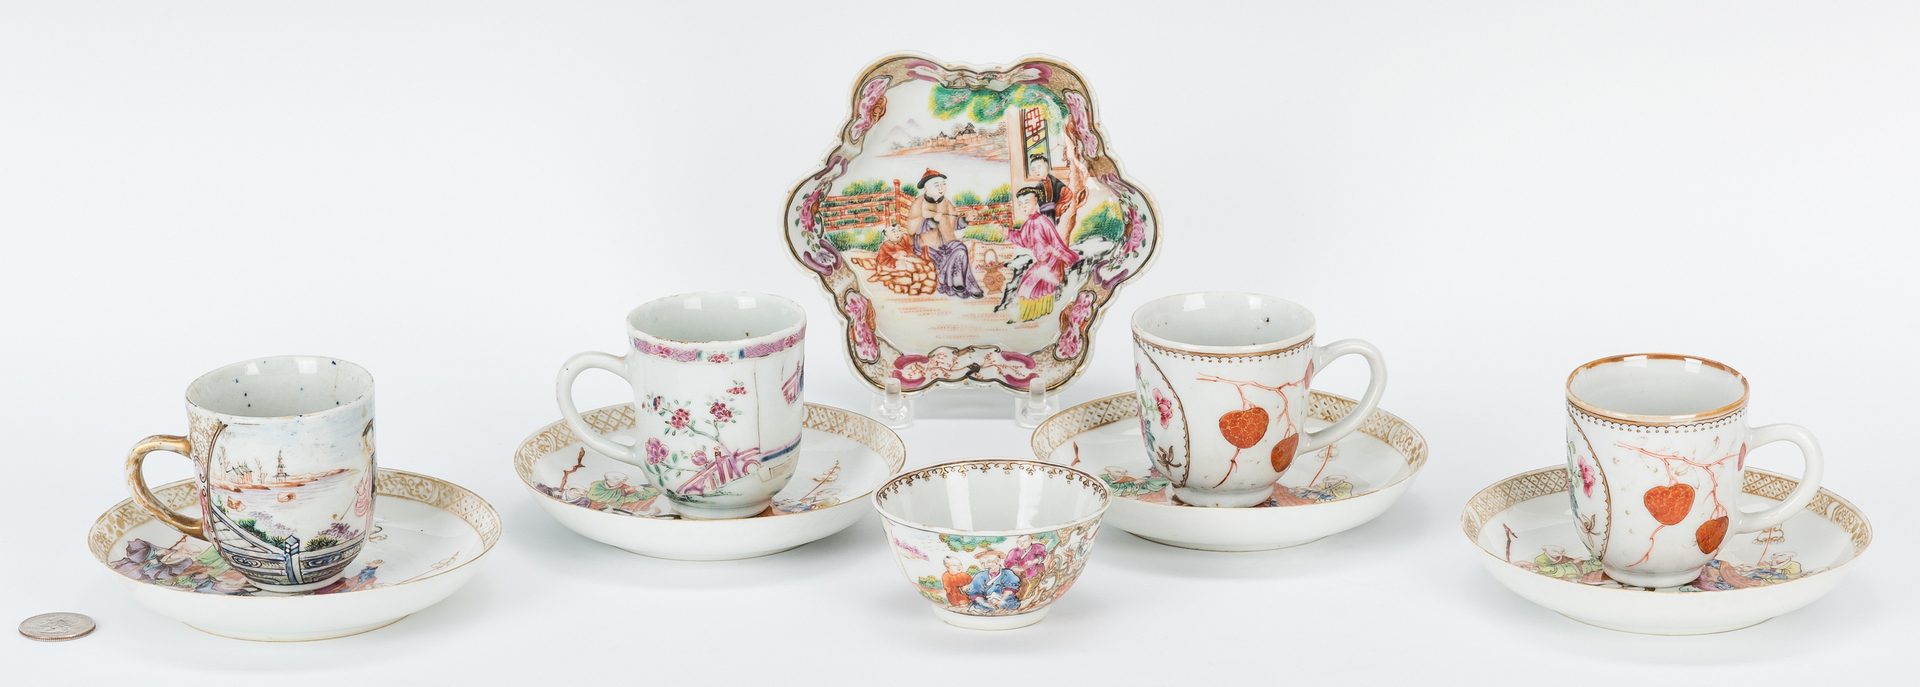 Lot 19: 10 Famille Rose Items inc. Immortal Decorated